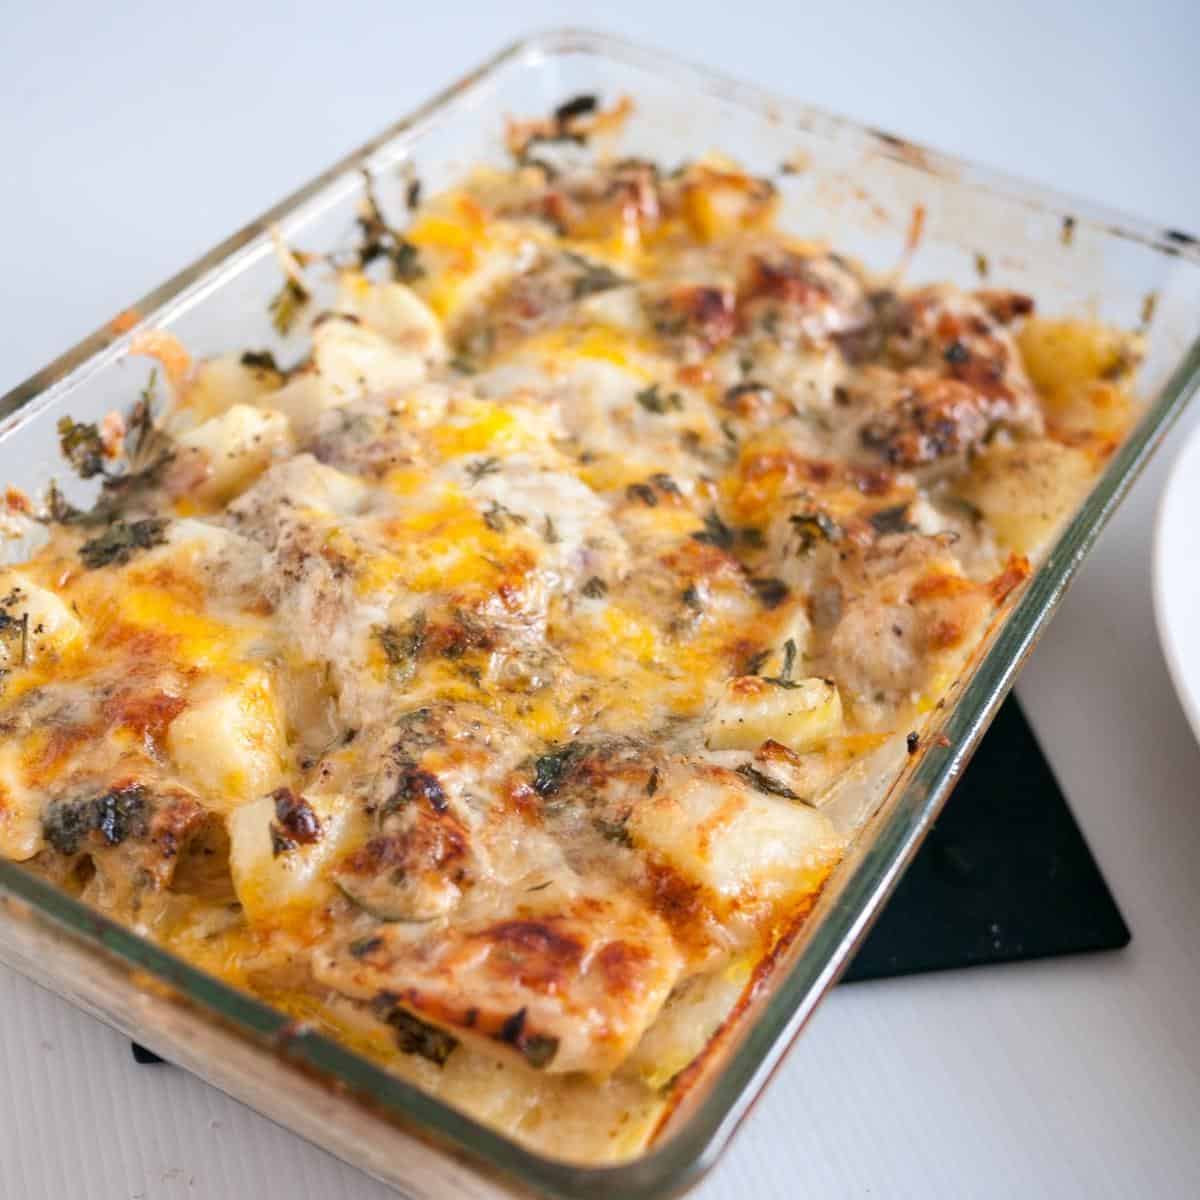 A casserole dish with baked chicken and potatoes.